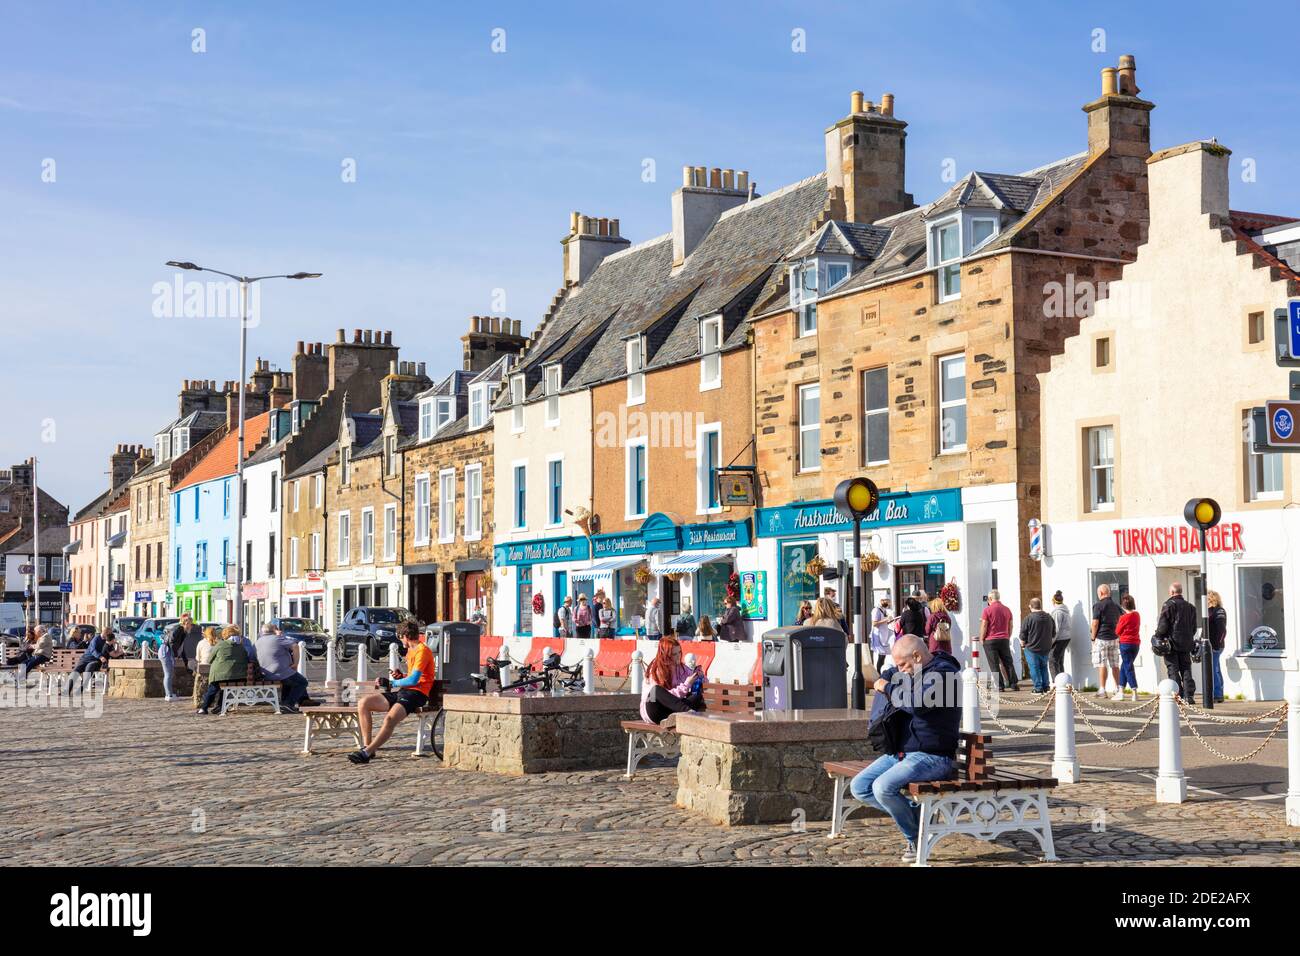 People sat outside the Anstruther Fish bar on the harbour in the scottish coastal port of Anstruther Fife Scotland East Neuk of Fife UK GB Europe Stock Photo